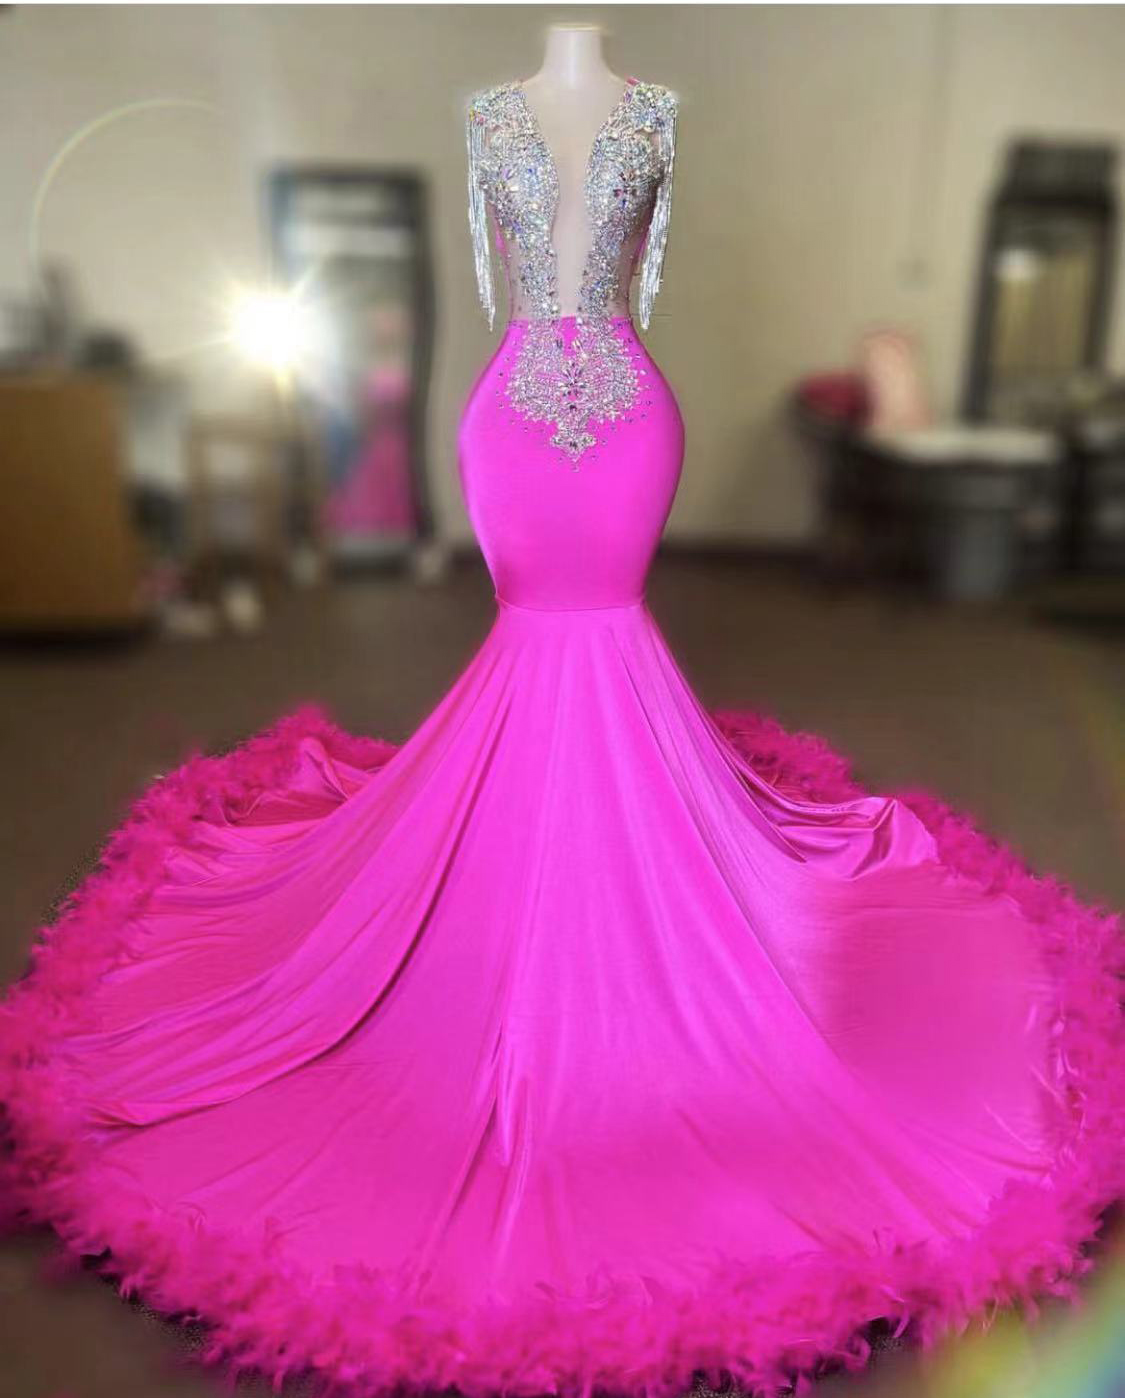 Pink Prom Dresses, Feather Prom Dresses, Mermaid Prom Dresses, Prom Dresses, Sexy Evening Dresses, Custom Make Evening Dresses, Lace Evening